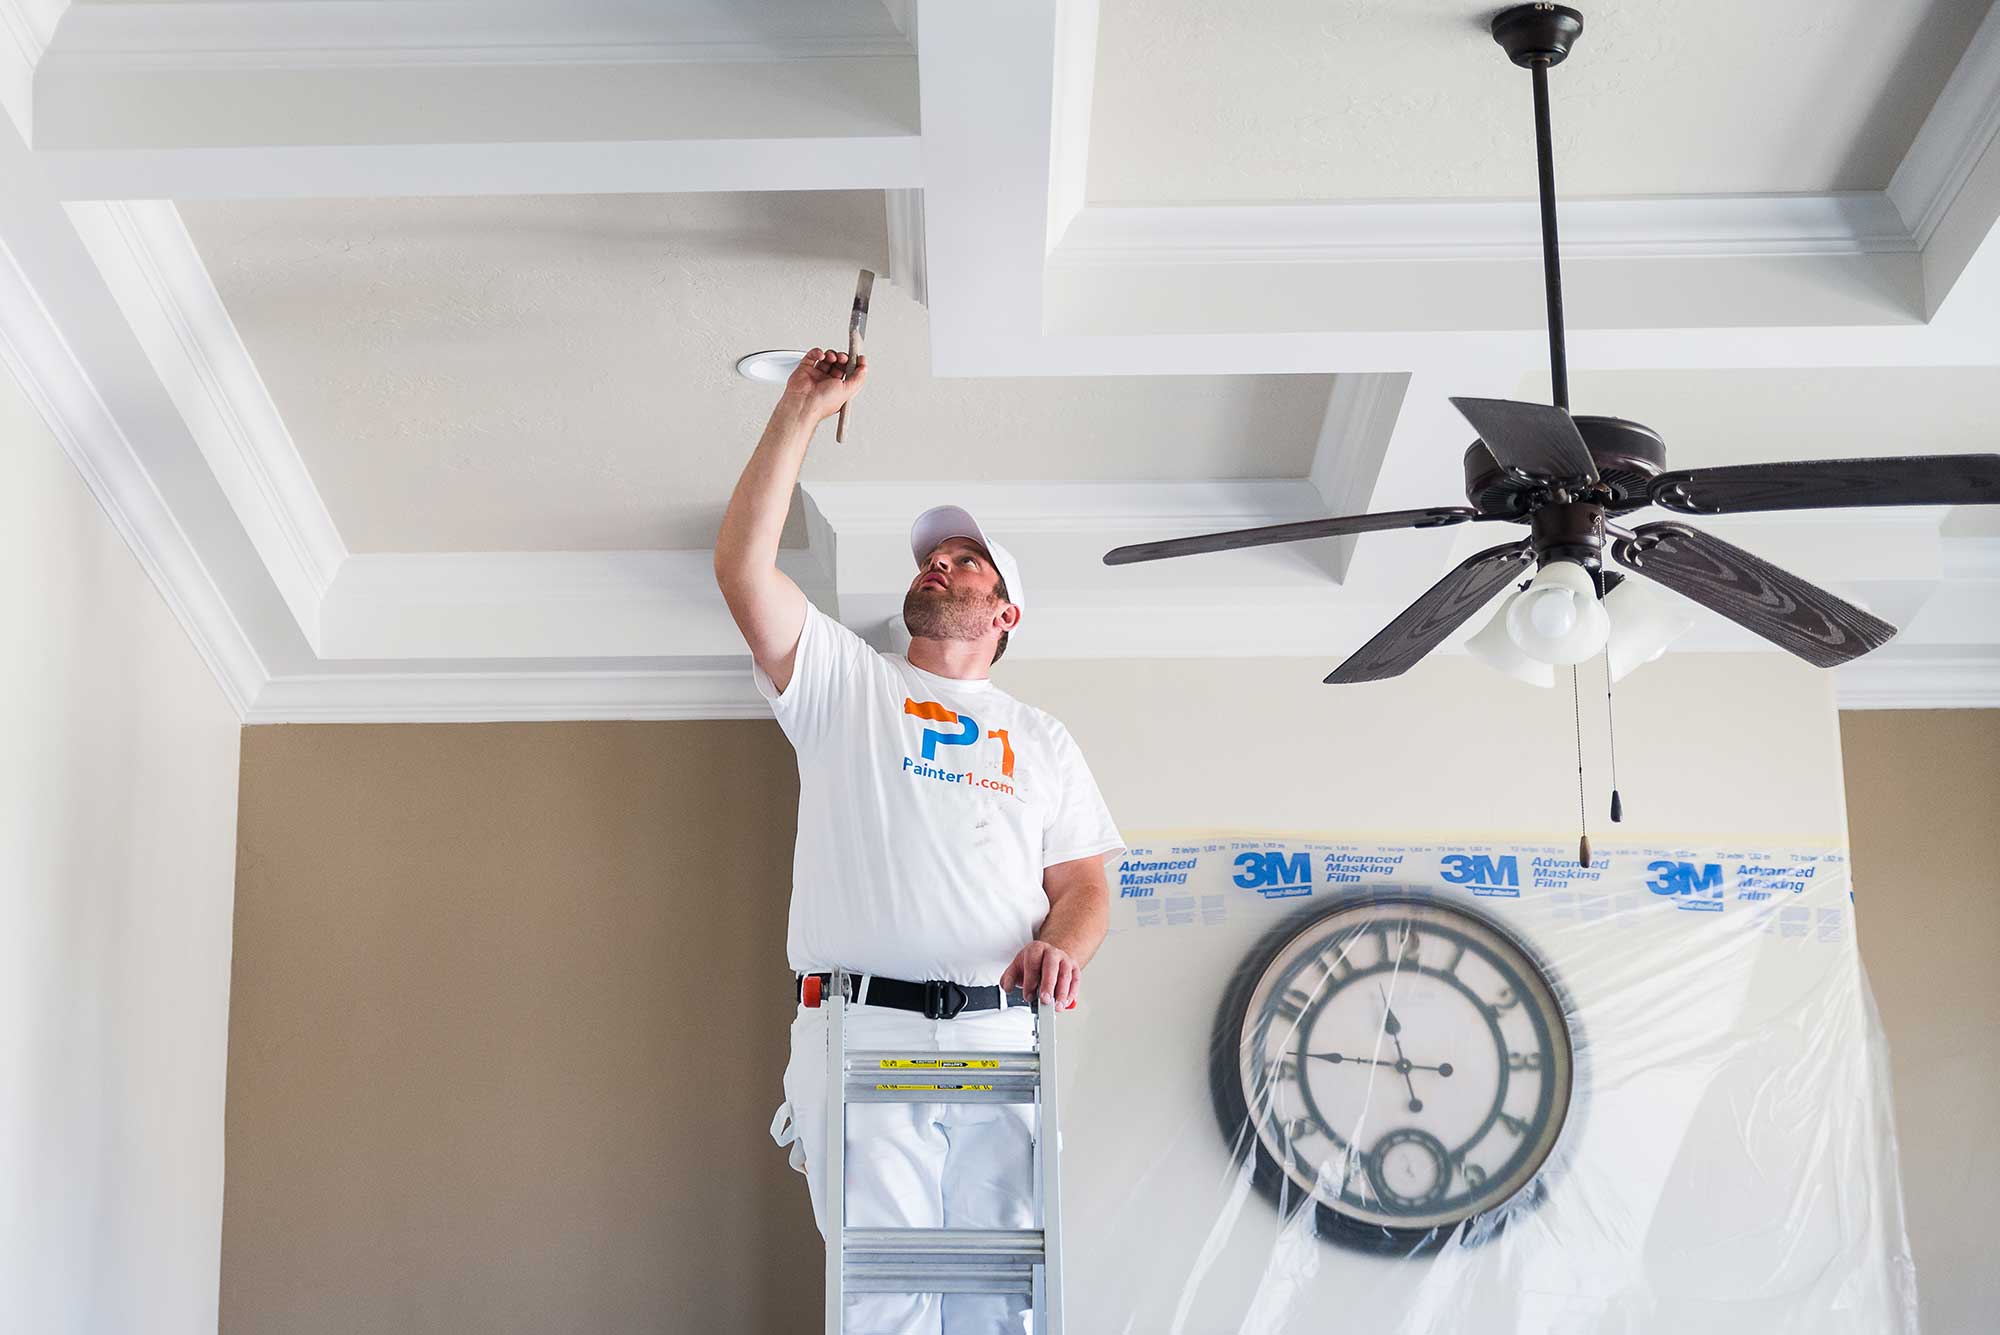 Painter1 of Orlando offers professional popcorn ceiling removal in Orlando.